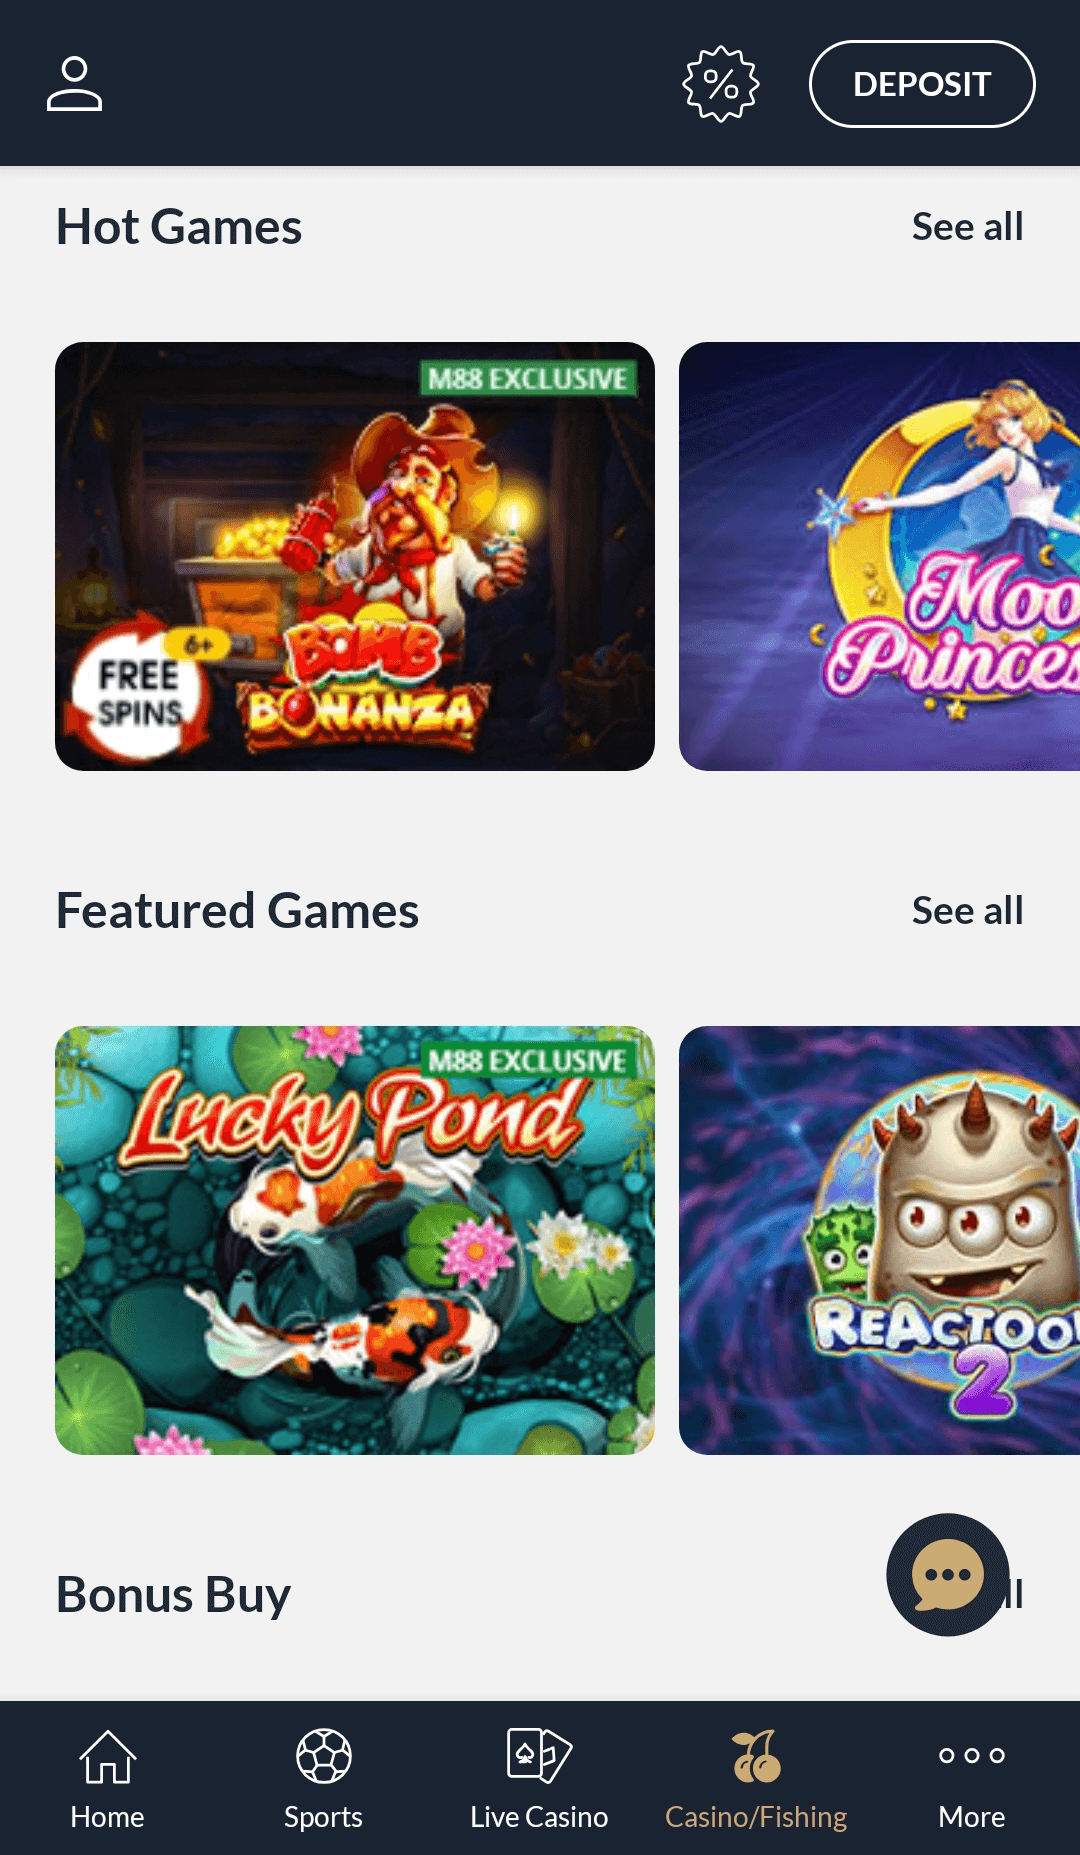 Online casino at the M88 app